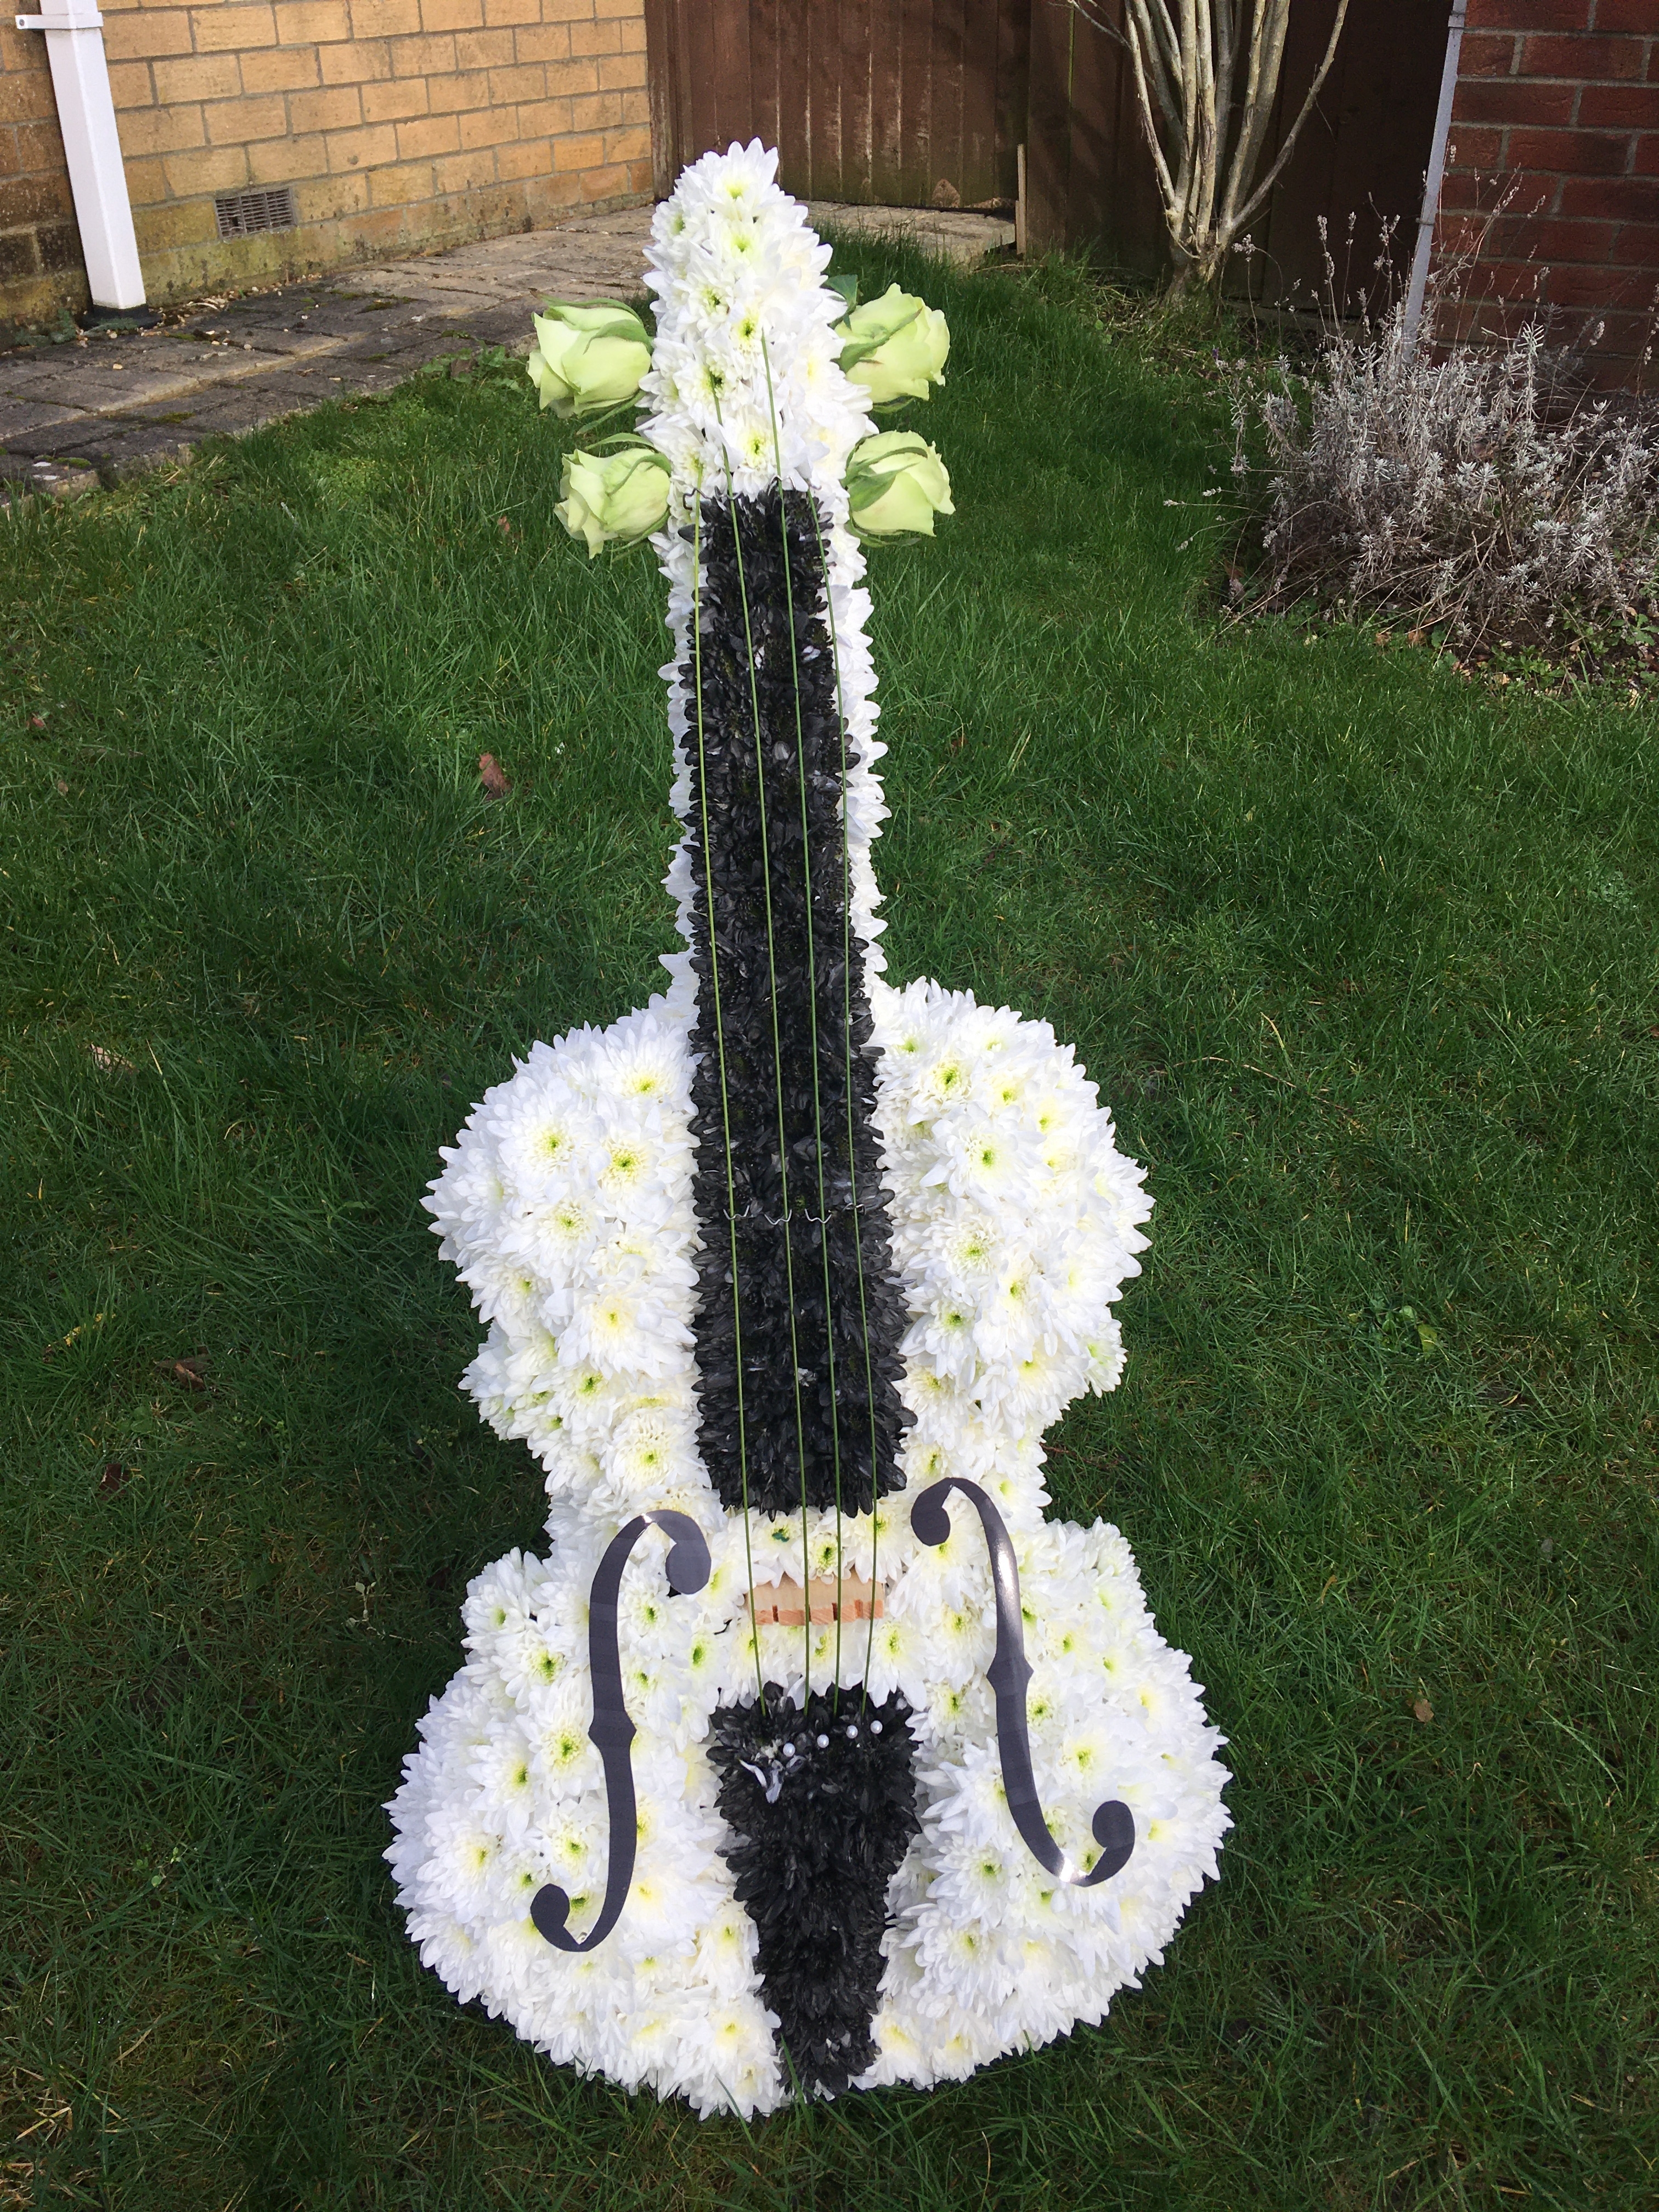 Cello made from flowers